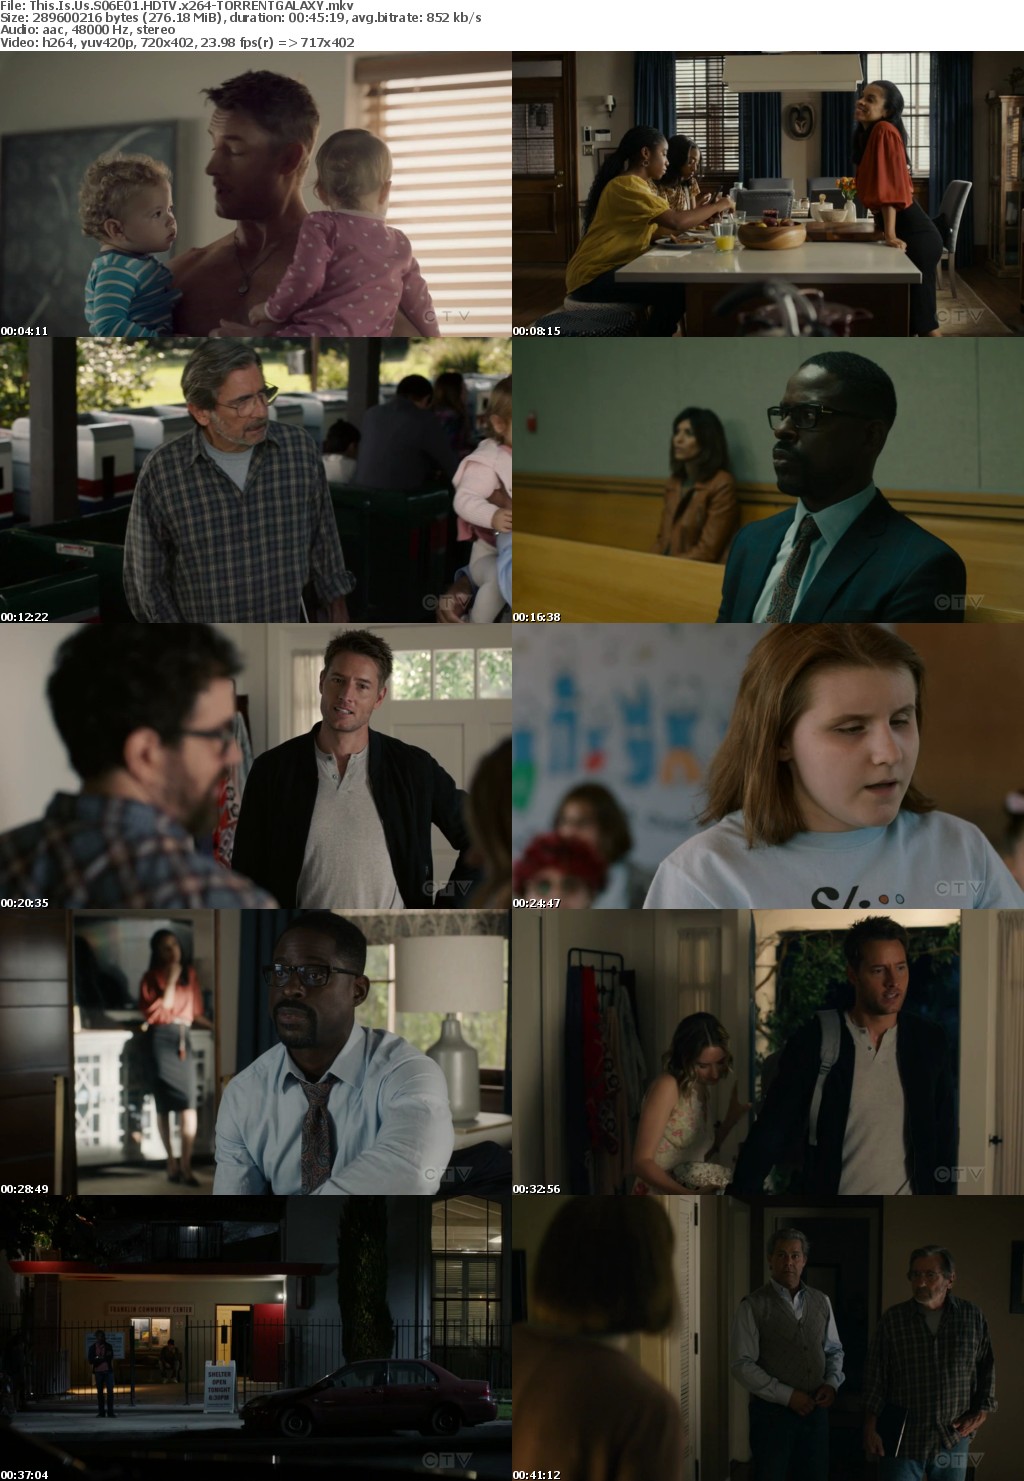 This Is Us S06E01 HDTV x264-GALAXY